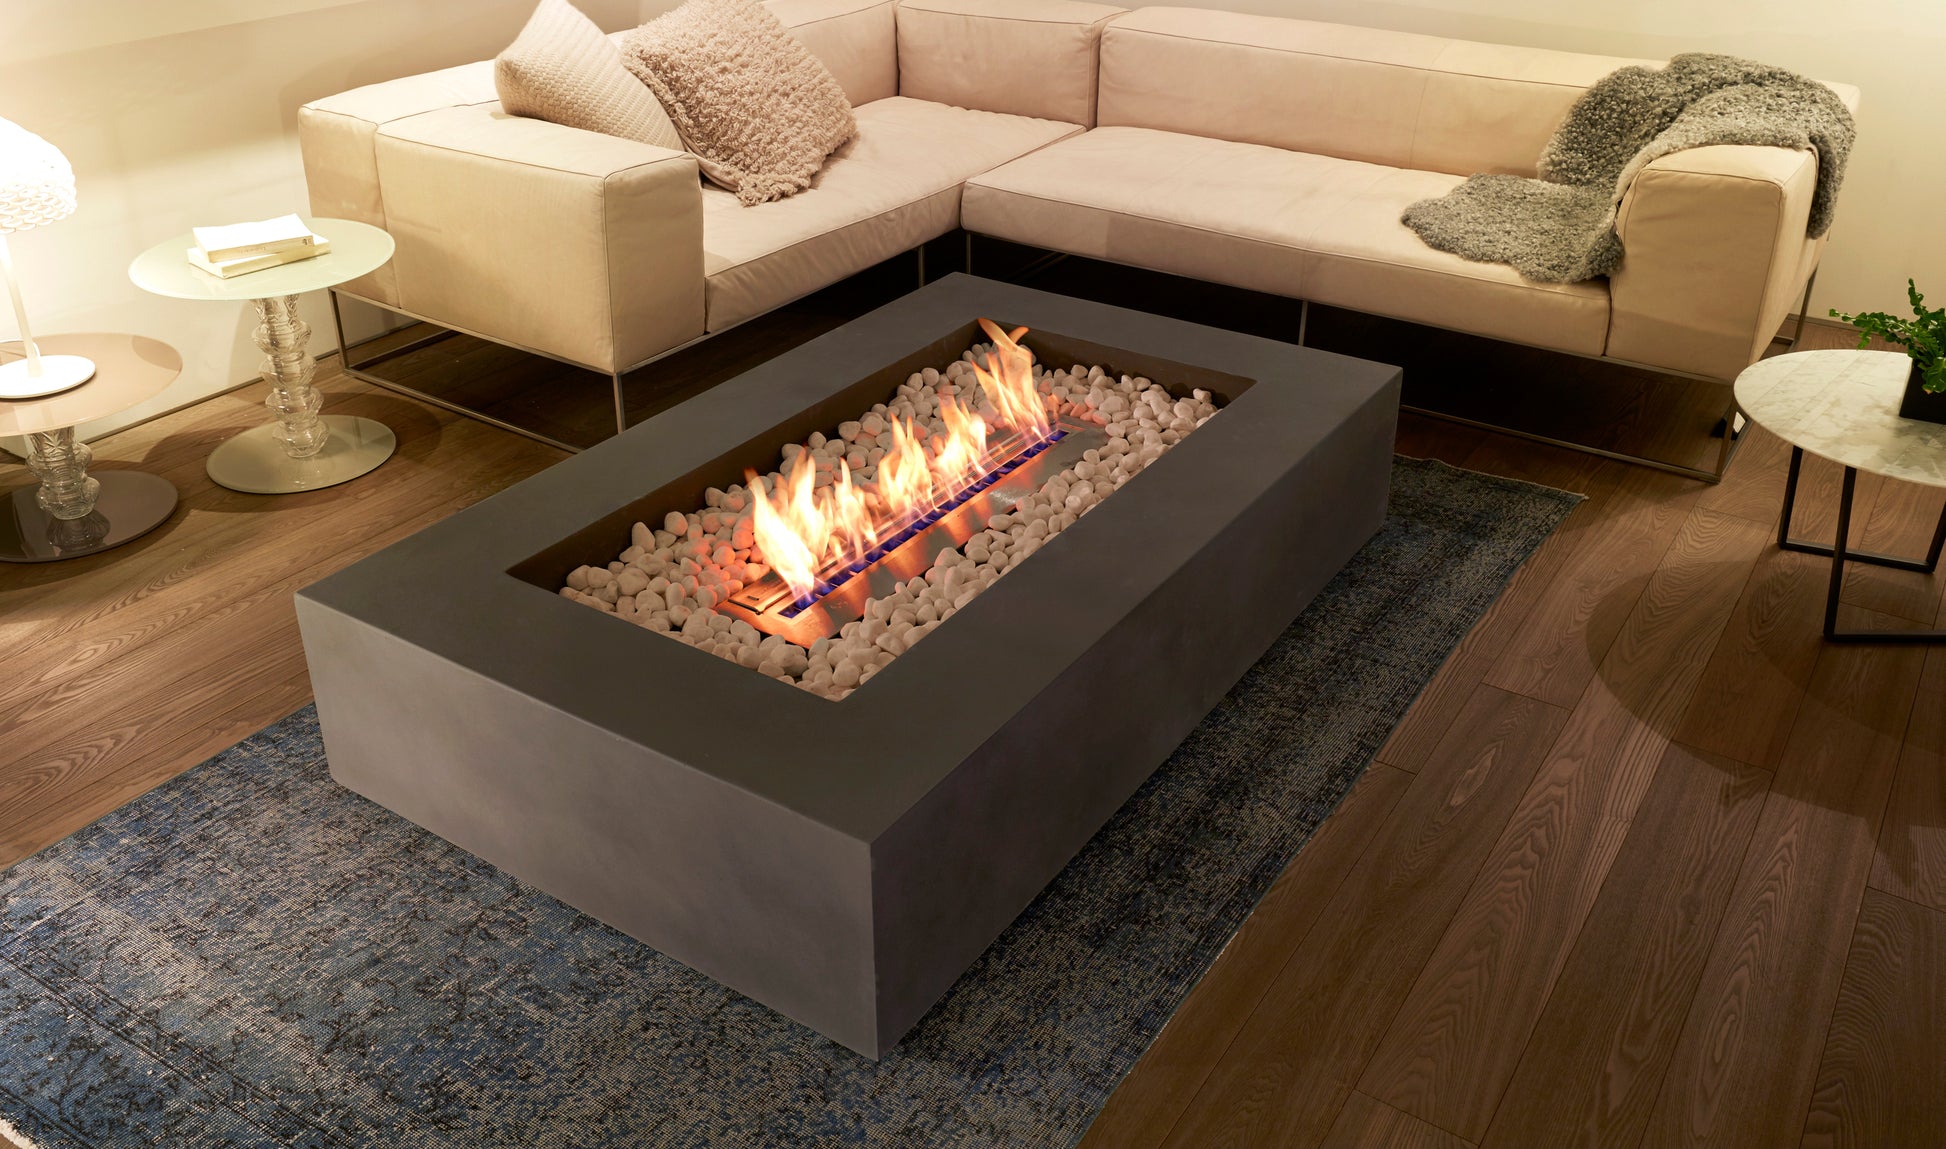 EcoSmart Fire Wharf 65 Fire Pit Table with Bioethanol Sustainable Fuel - PadioLiving - EcoSmart Fire Wharf 65 Fire Pit Table with Bioethanol Sustainable Fuel - Fire Pit - PadioLiving